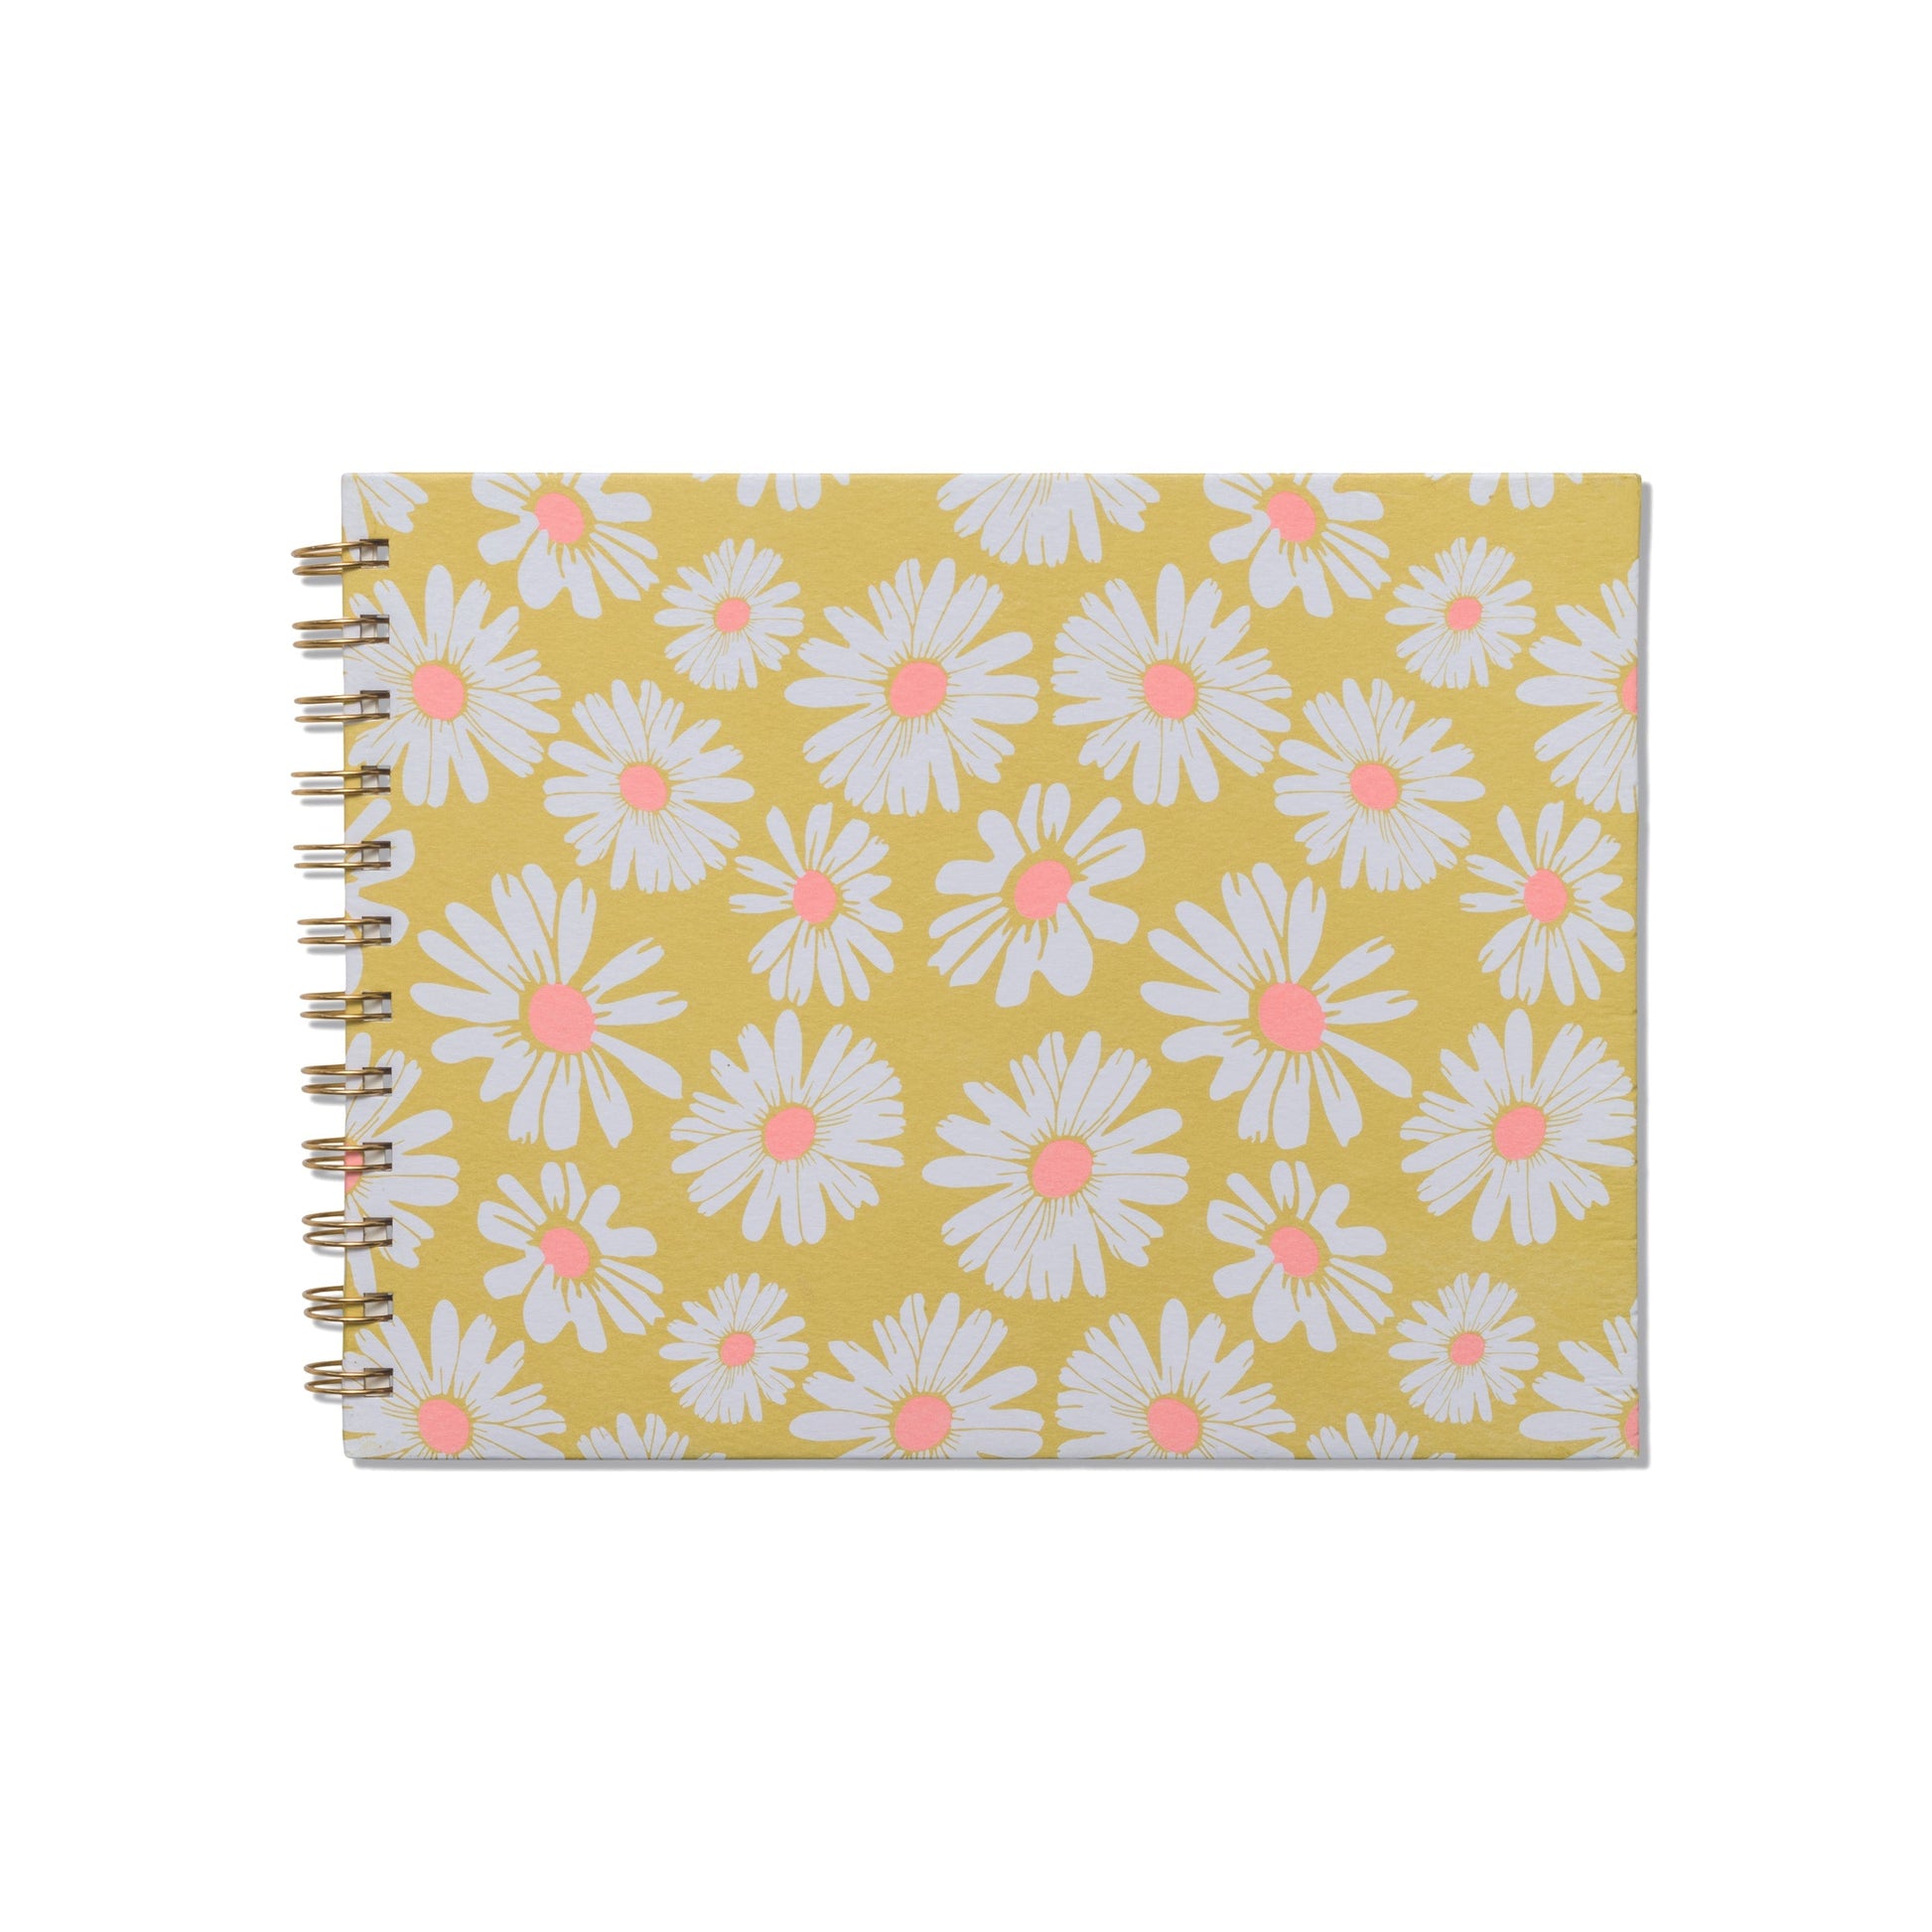 Yellow planner with daises illustrated on exterior.